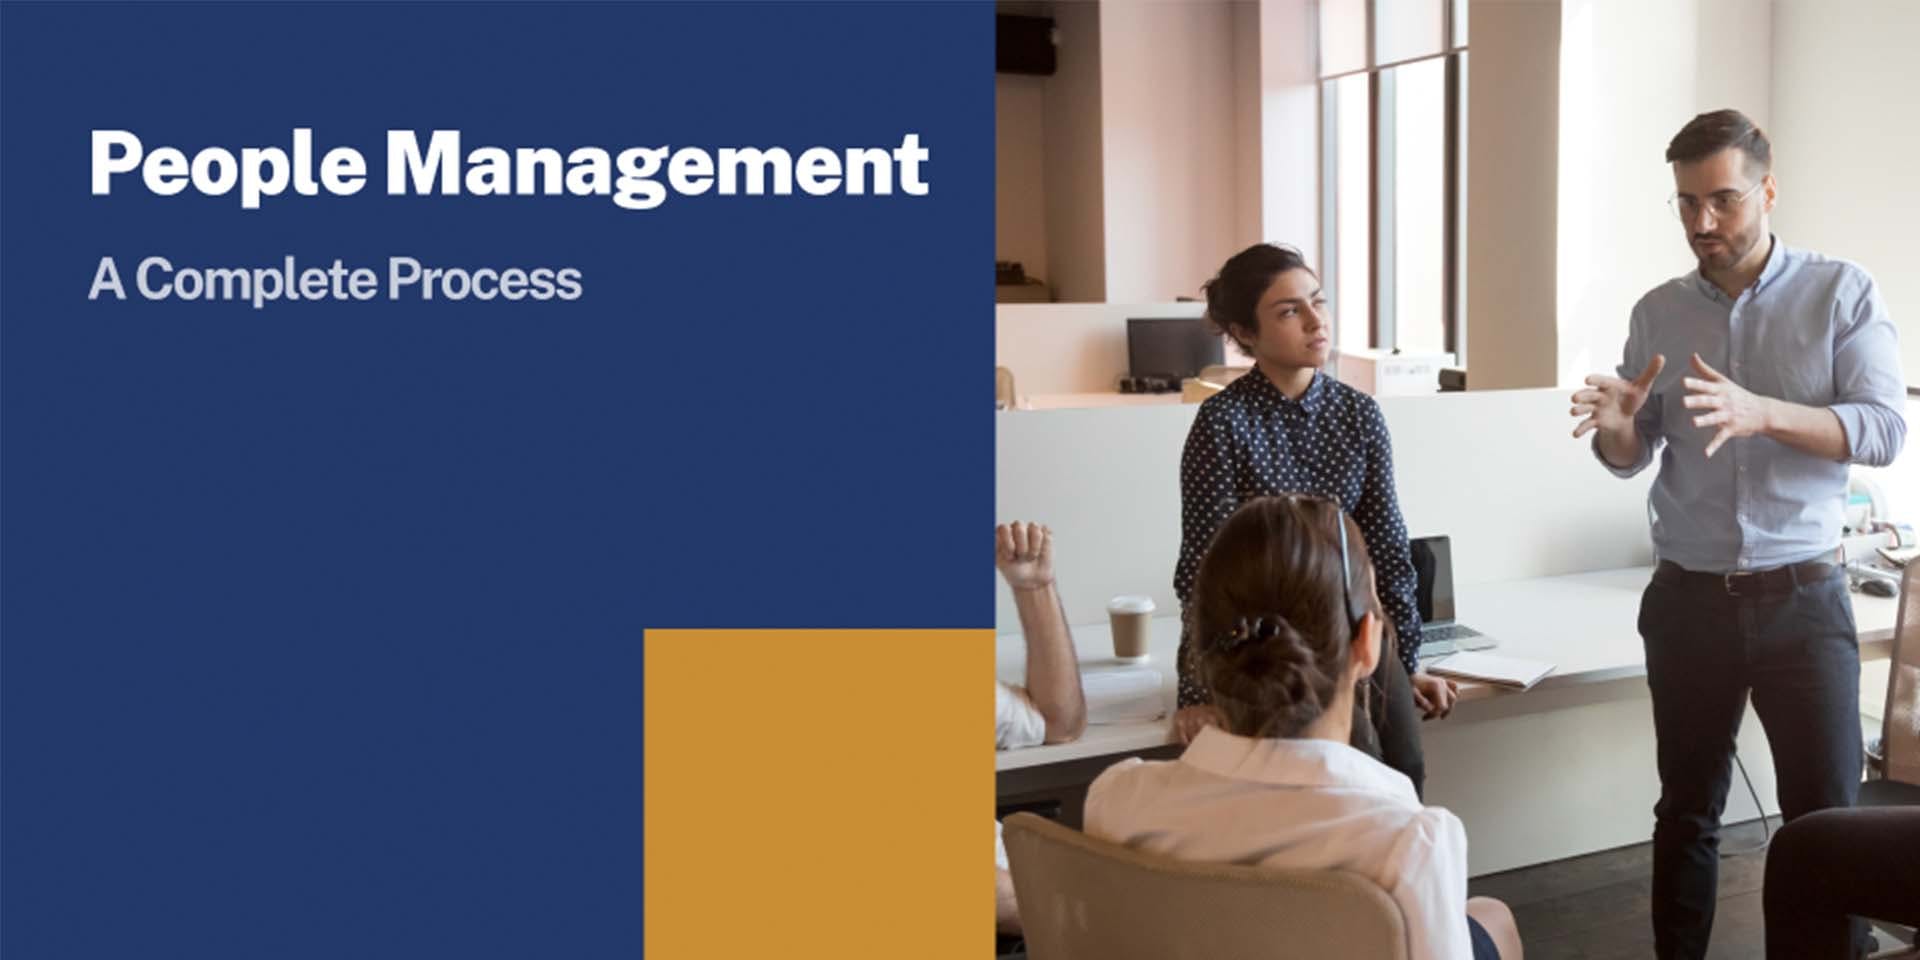 People Management: A Complete Process